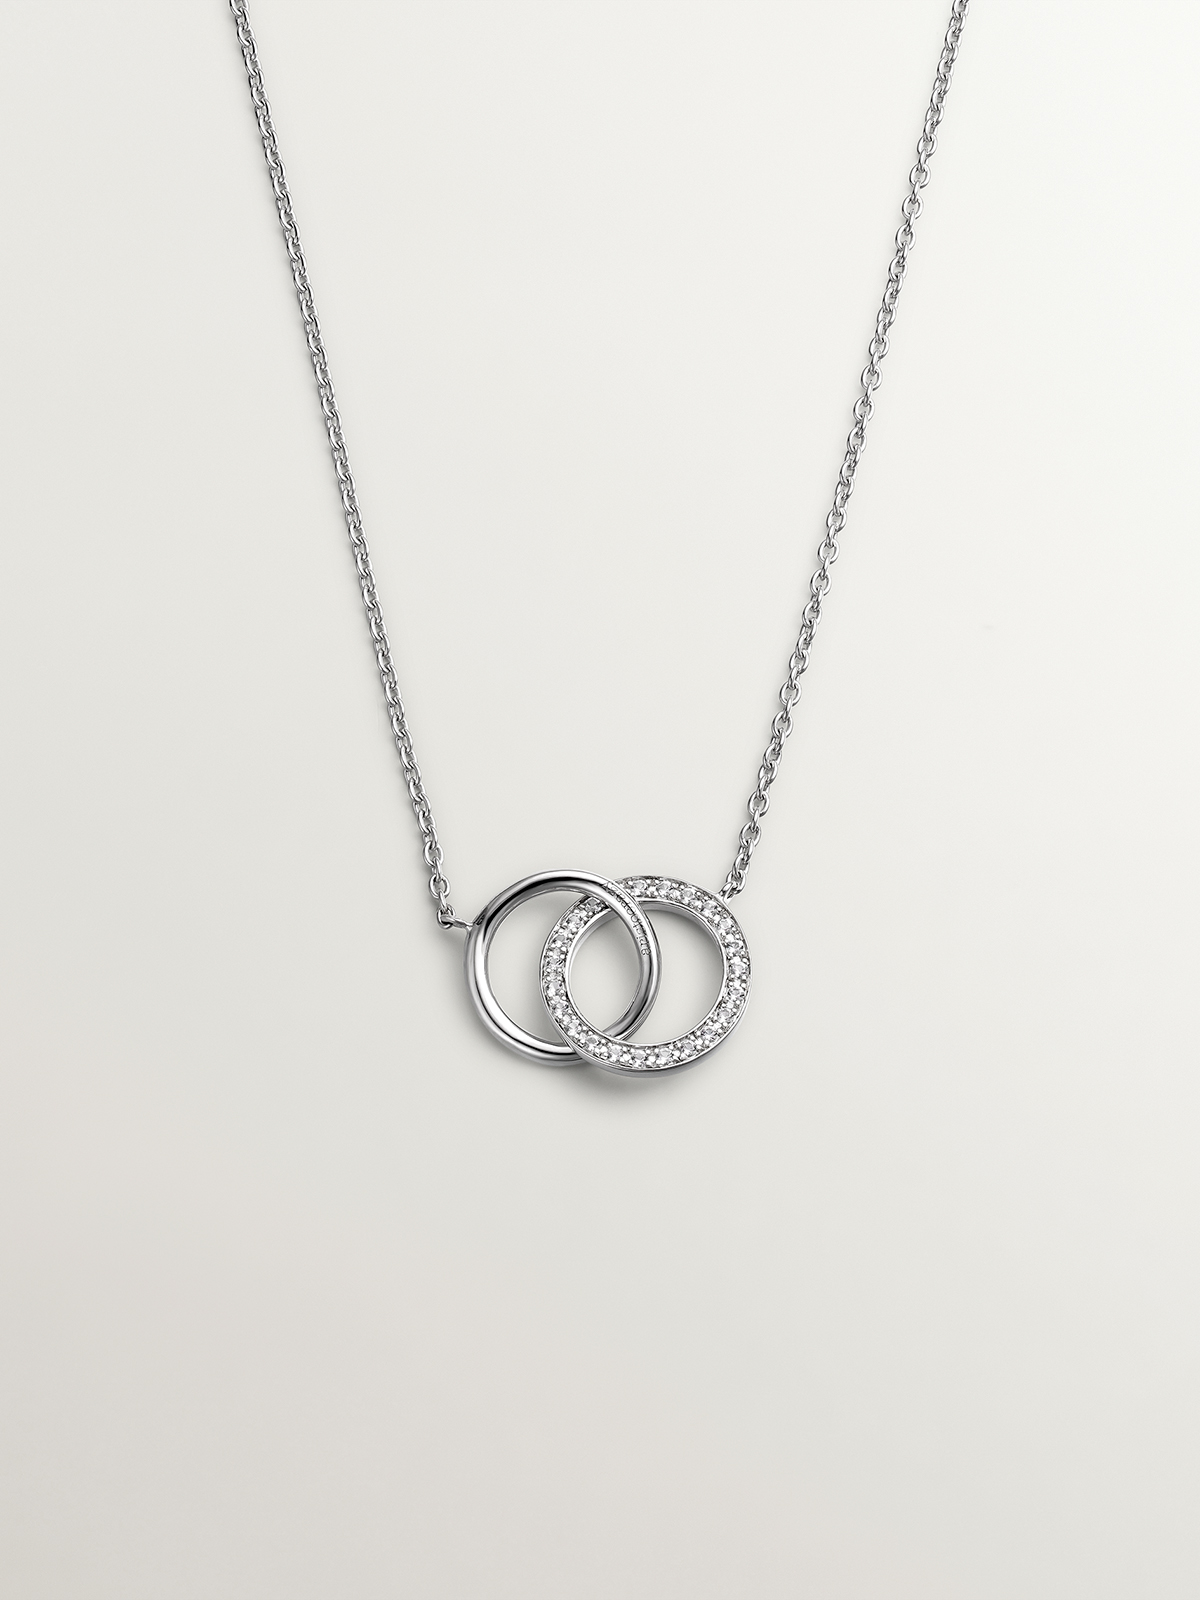 925 Silver pendant with circles and white topaz.